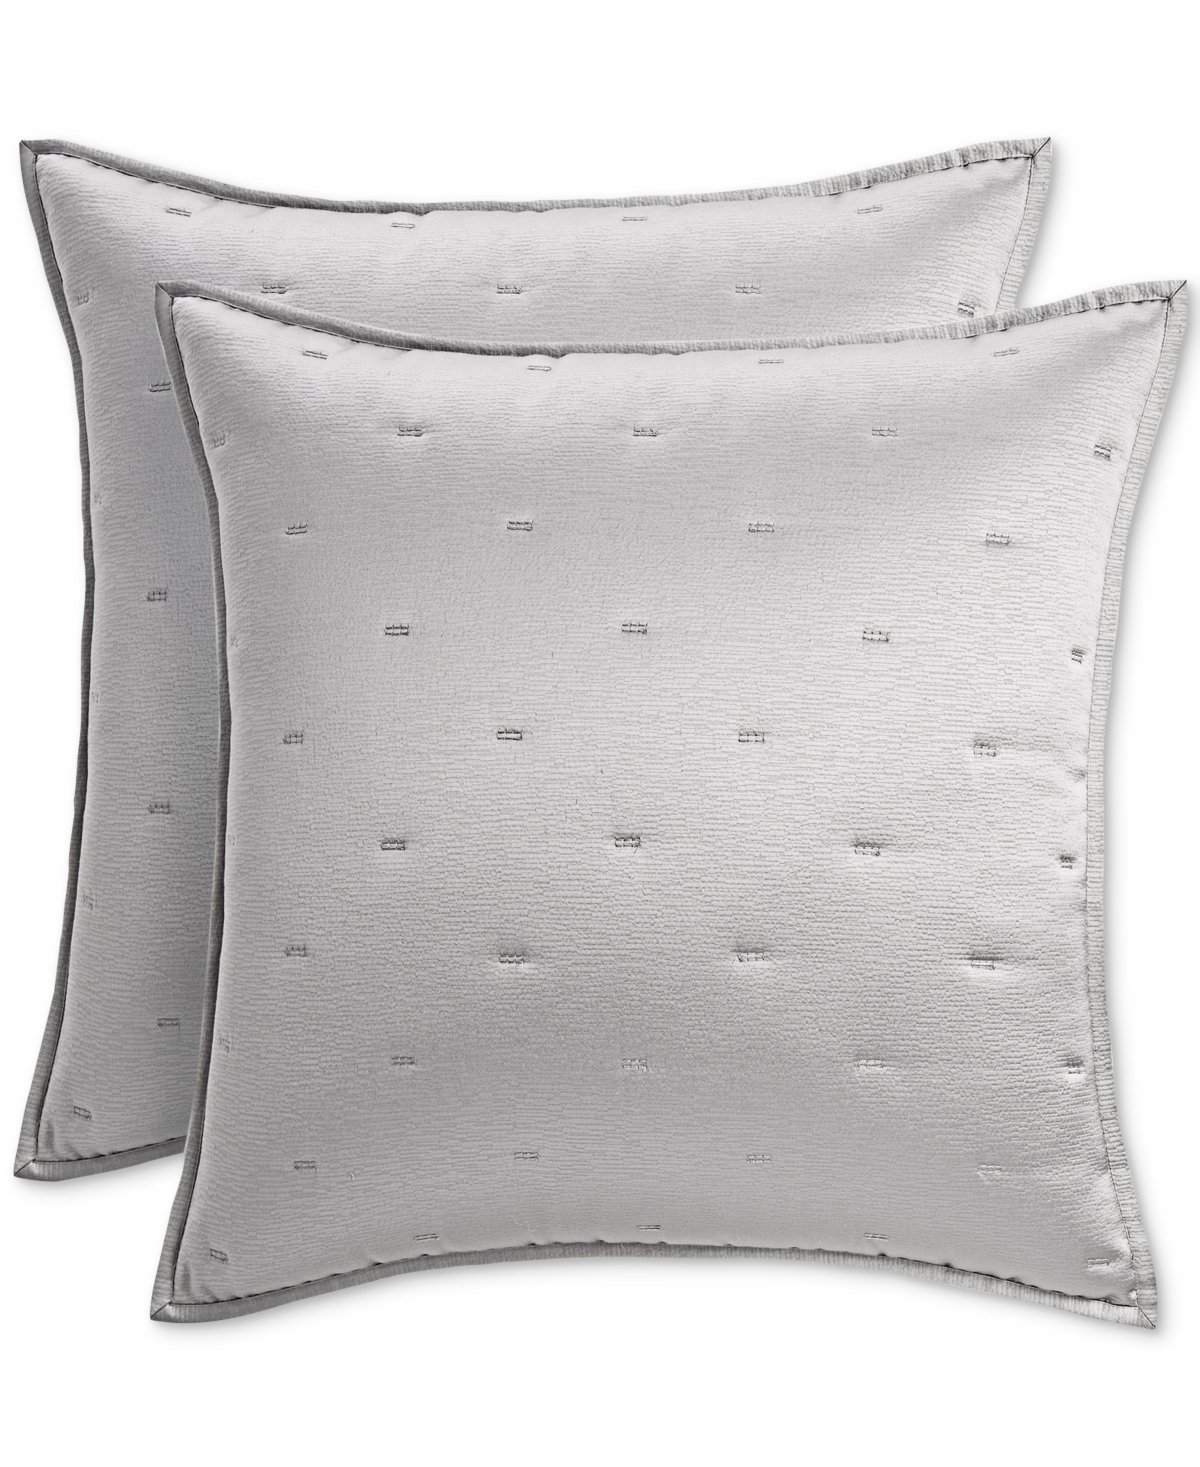 Glint Quilted 2-Pc. European Sham Set, Created for Macy's - Gold